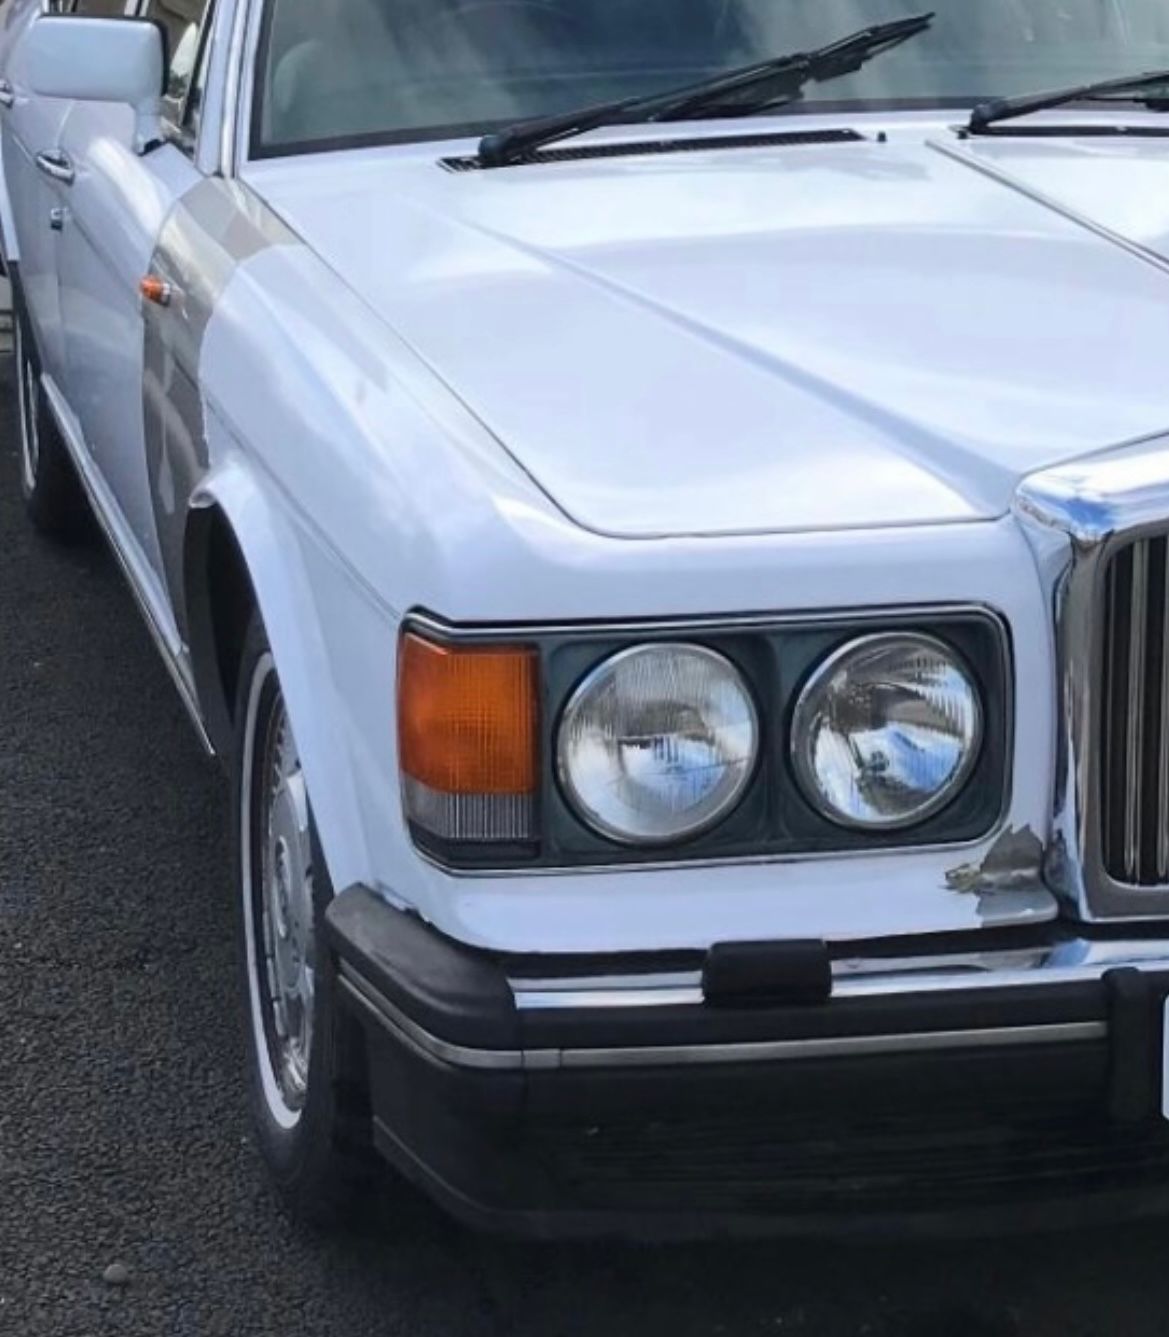 1990 Bentley Mulsanne S - Entry level motoring at a low estimate - Image 3 of 22